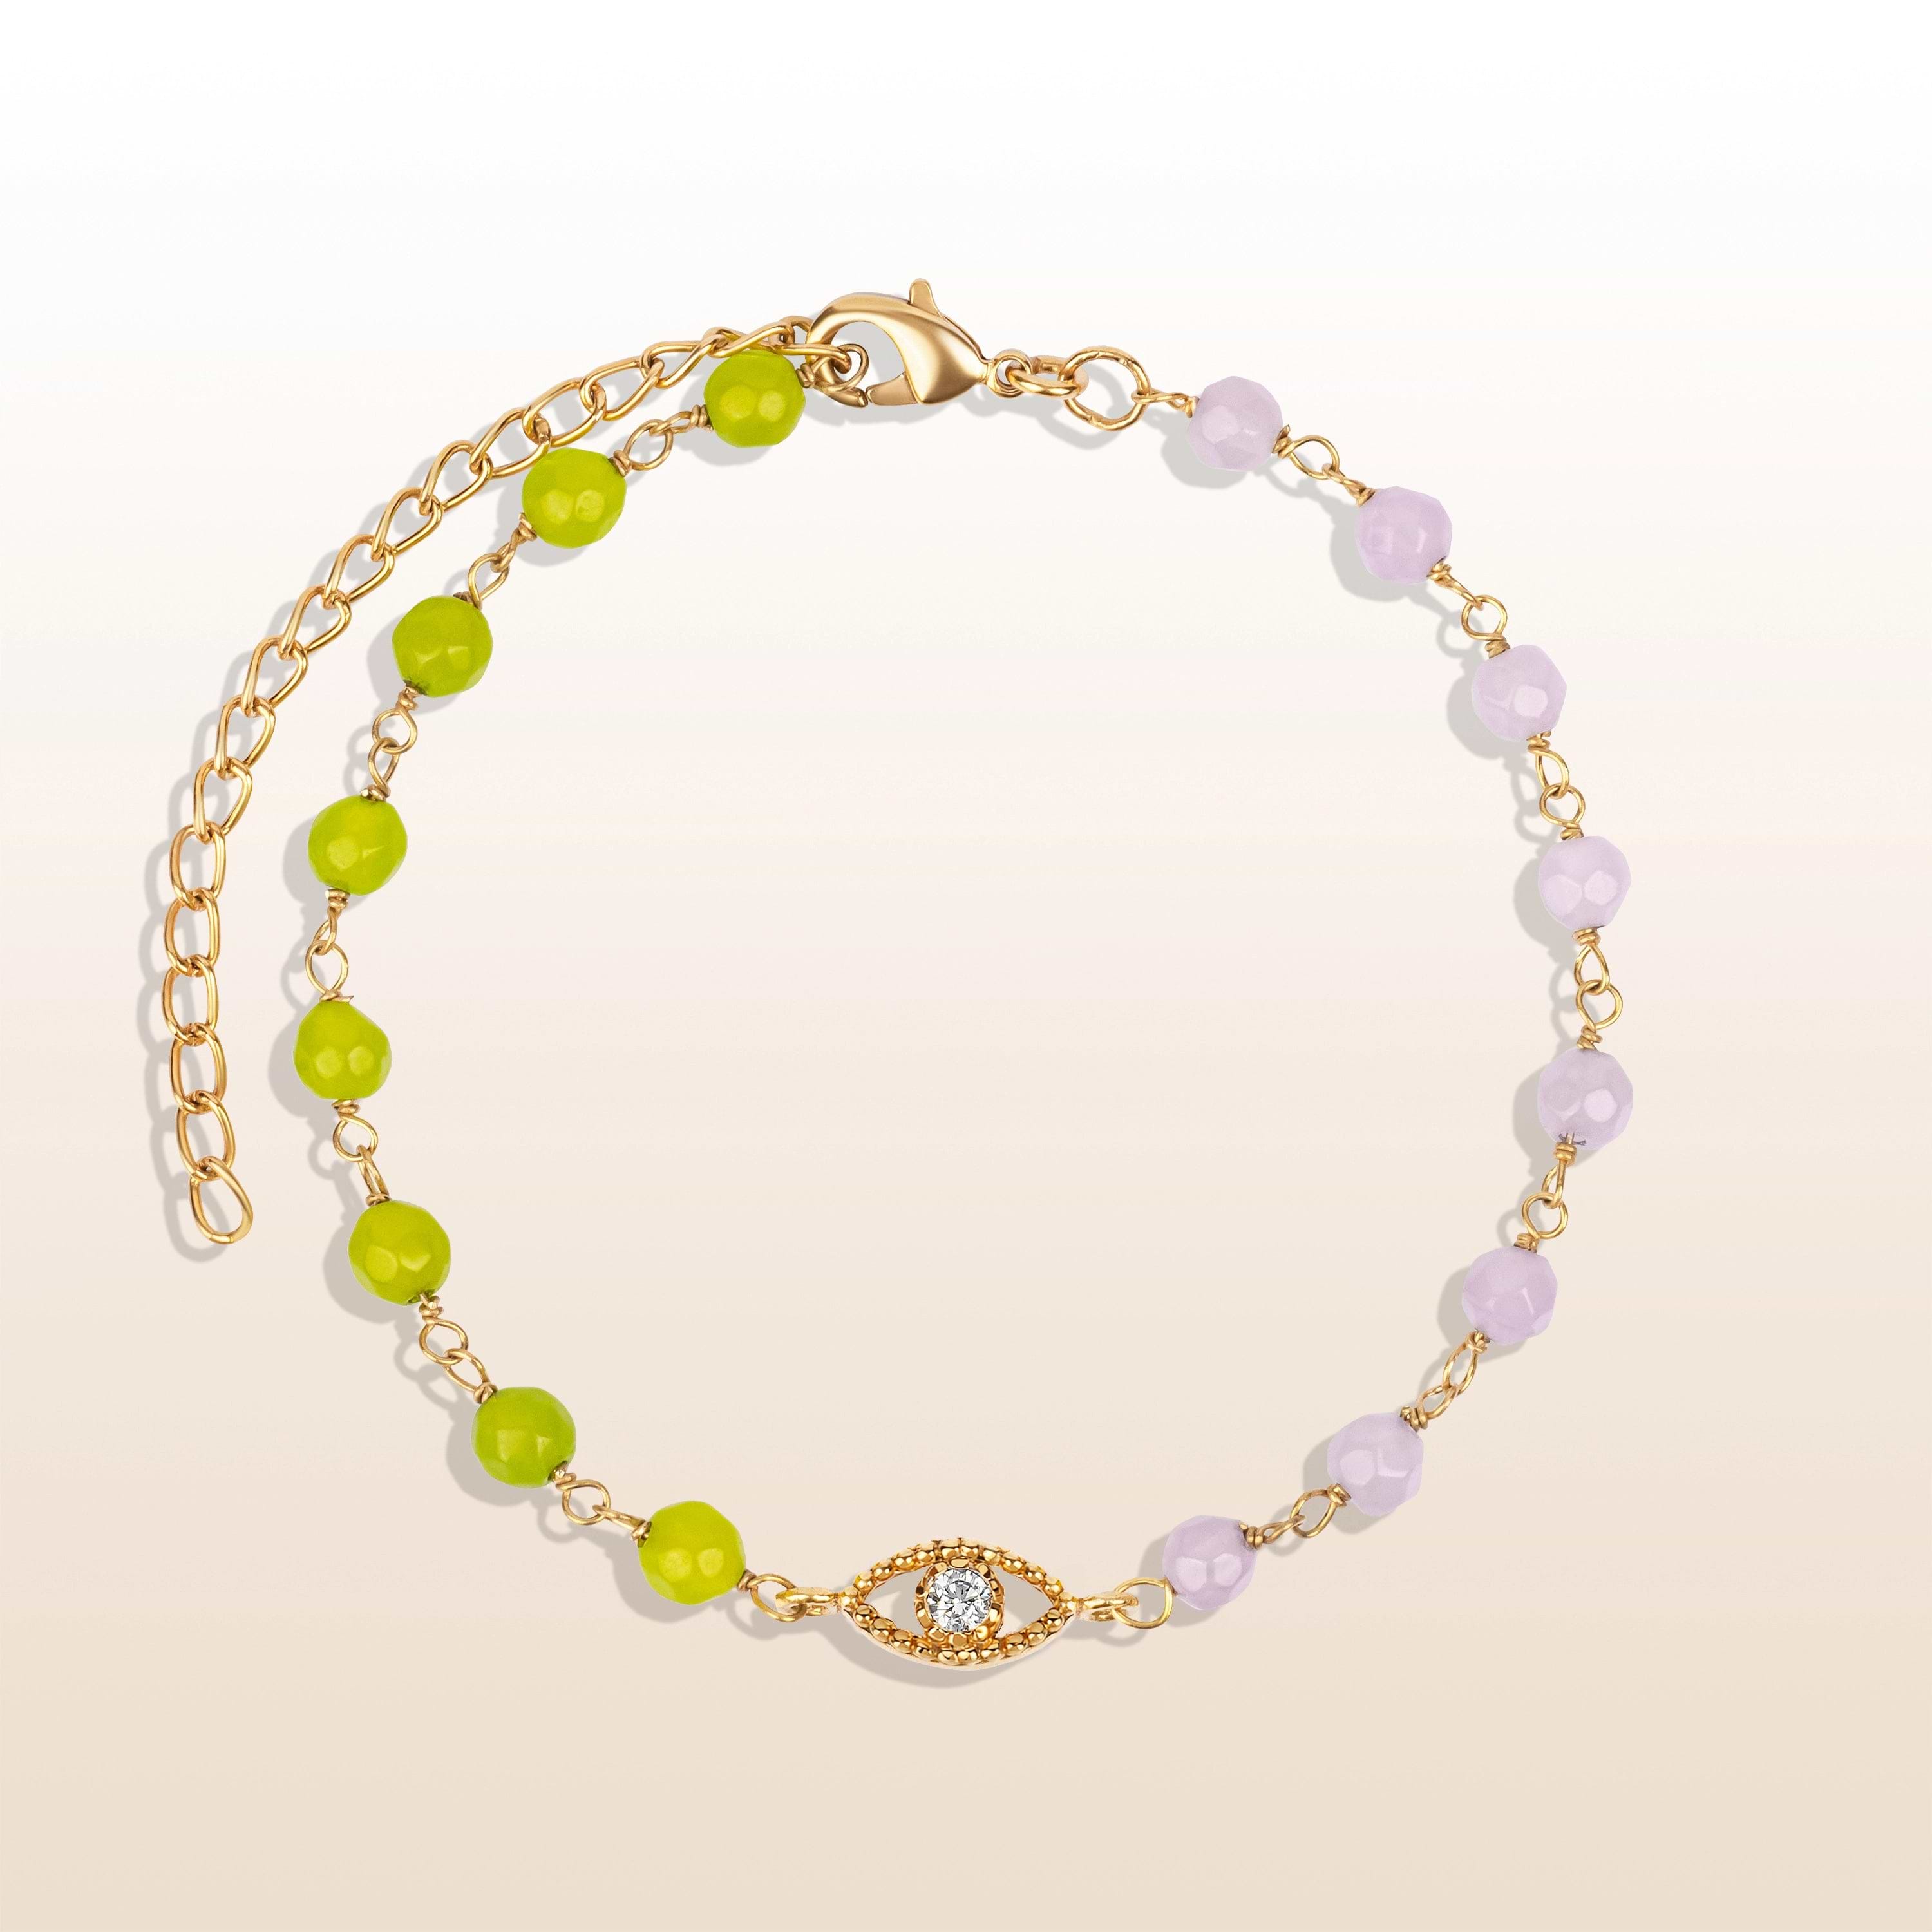 Picture of Limitless Possibility - Jade Evil Eye Bracelet